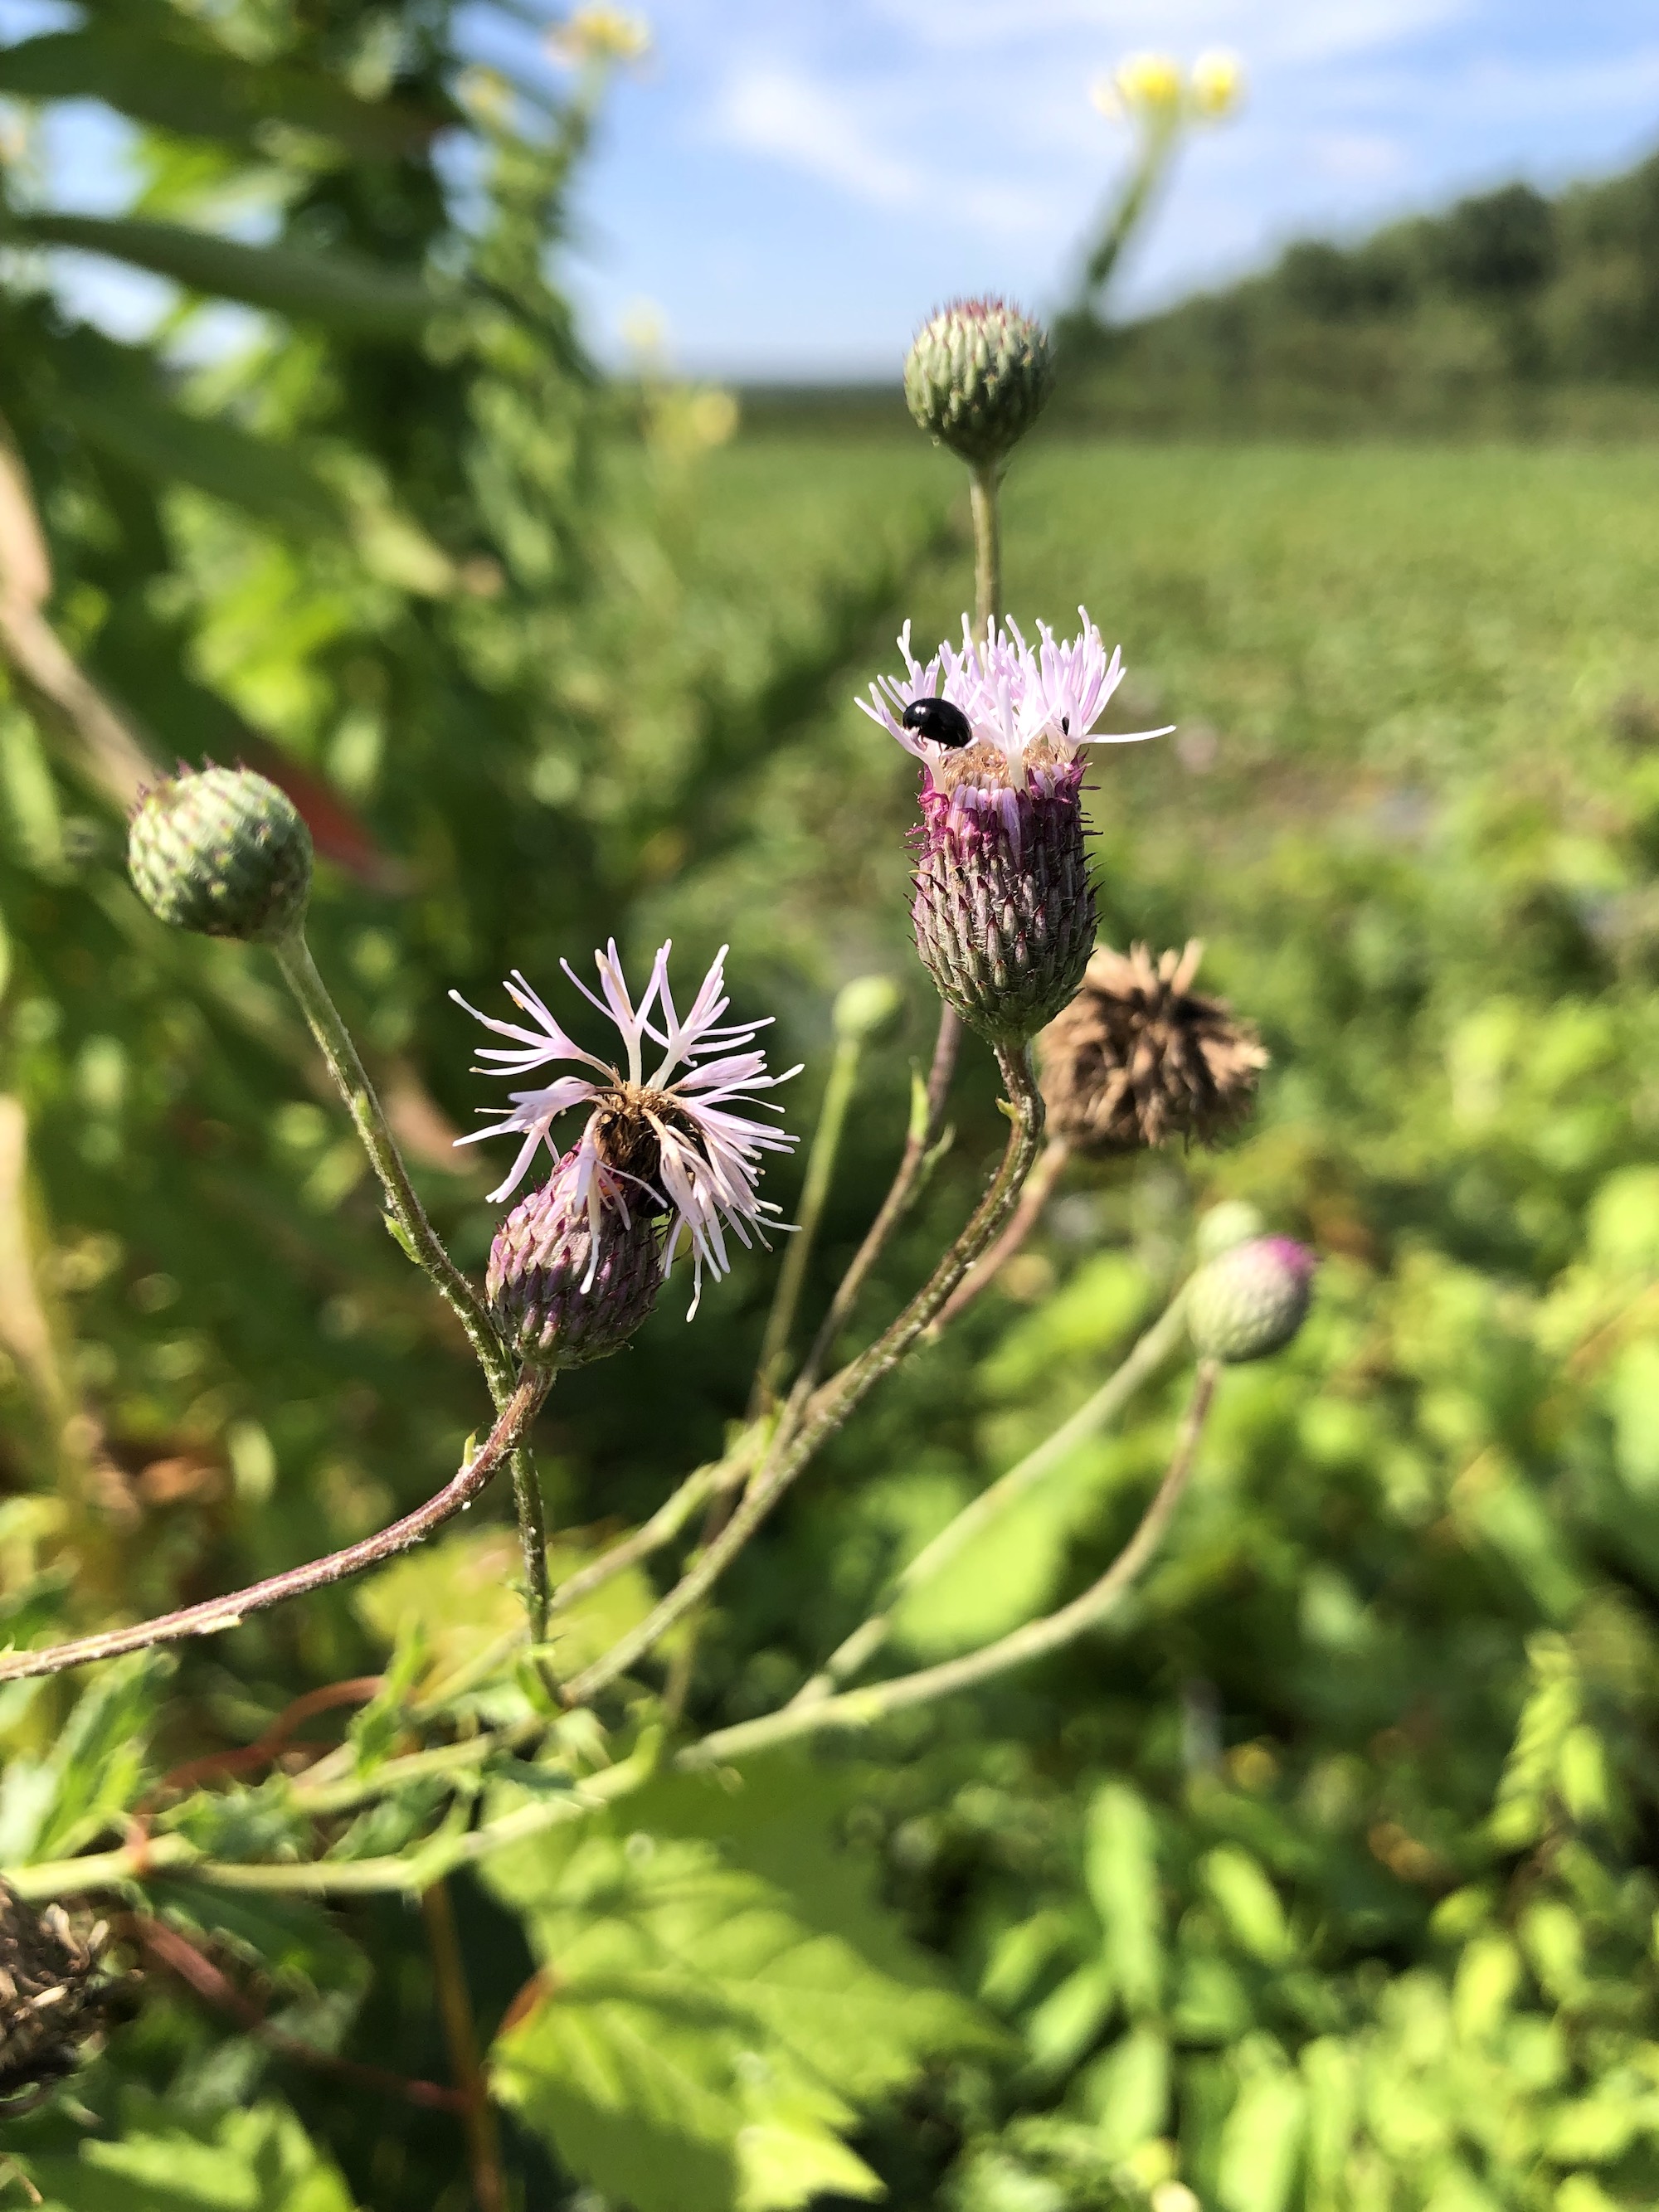 Canada Thistle on the shore of Lake Wingra in Vilas Park in Madison, Wisconsin on August 24, 2022.